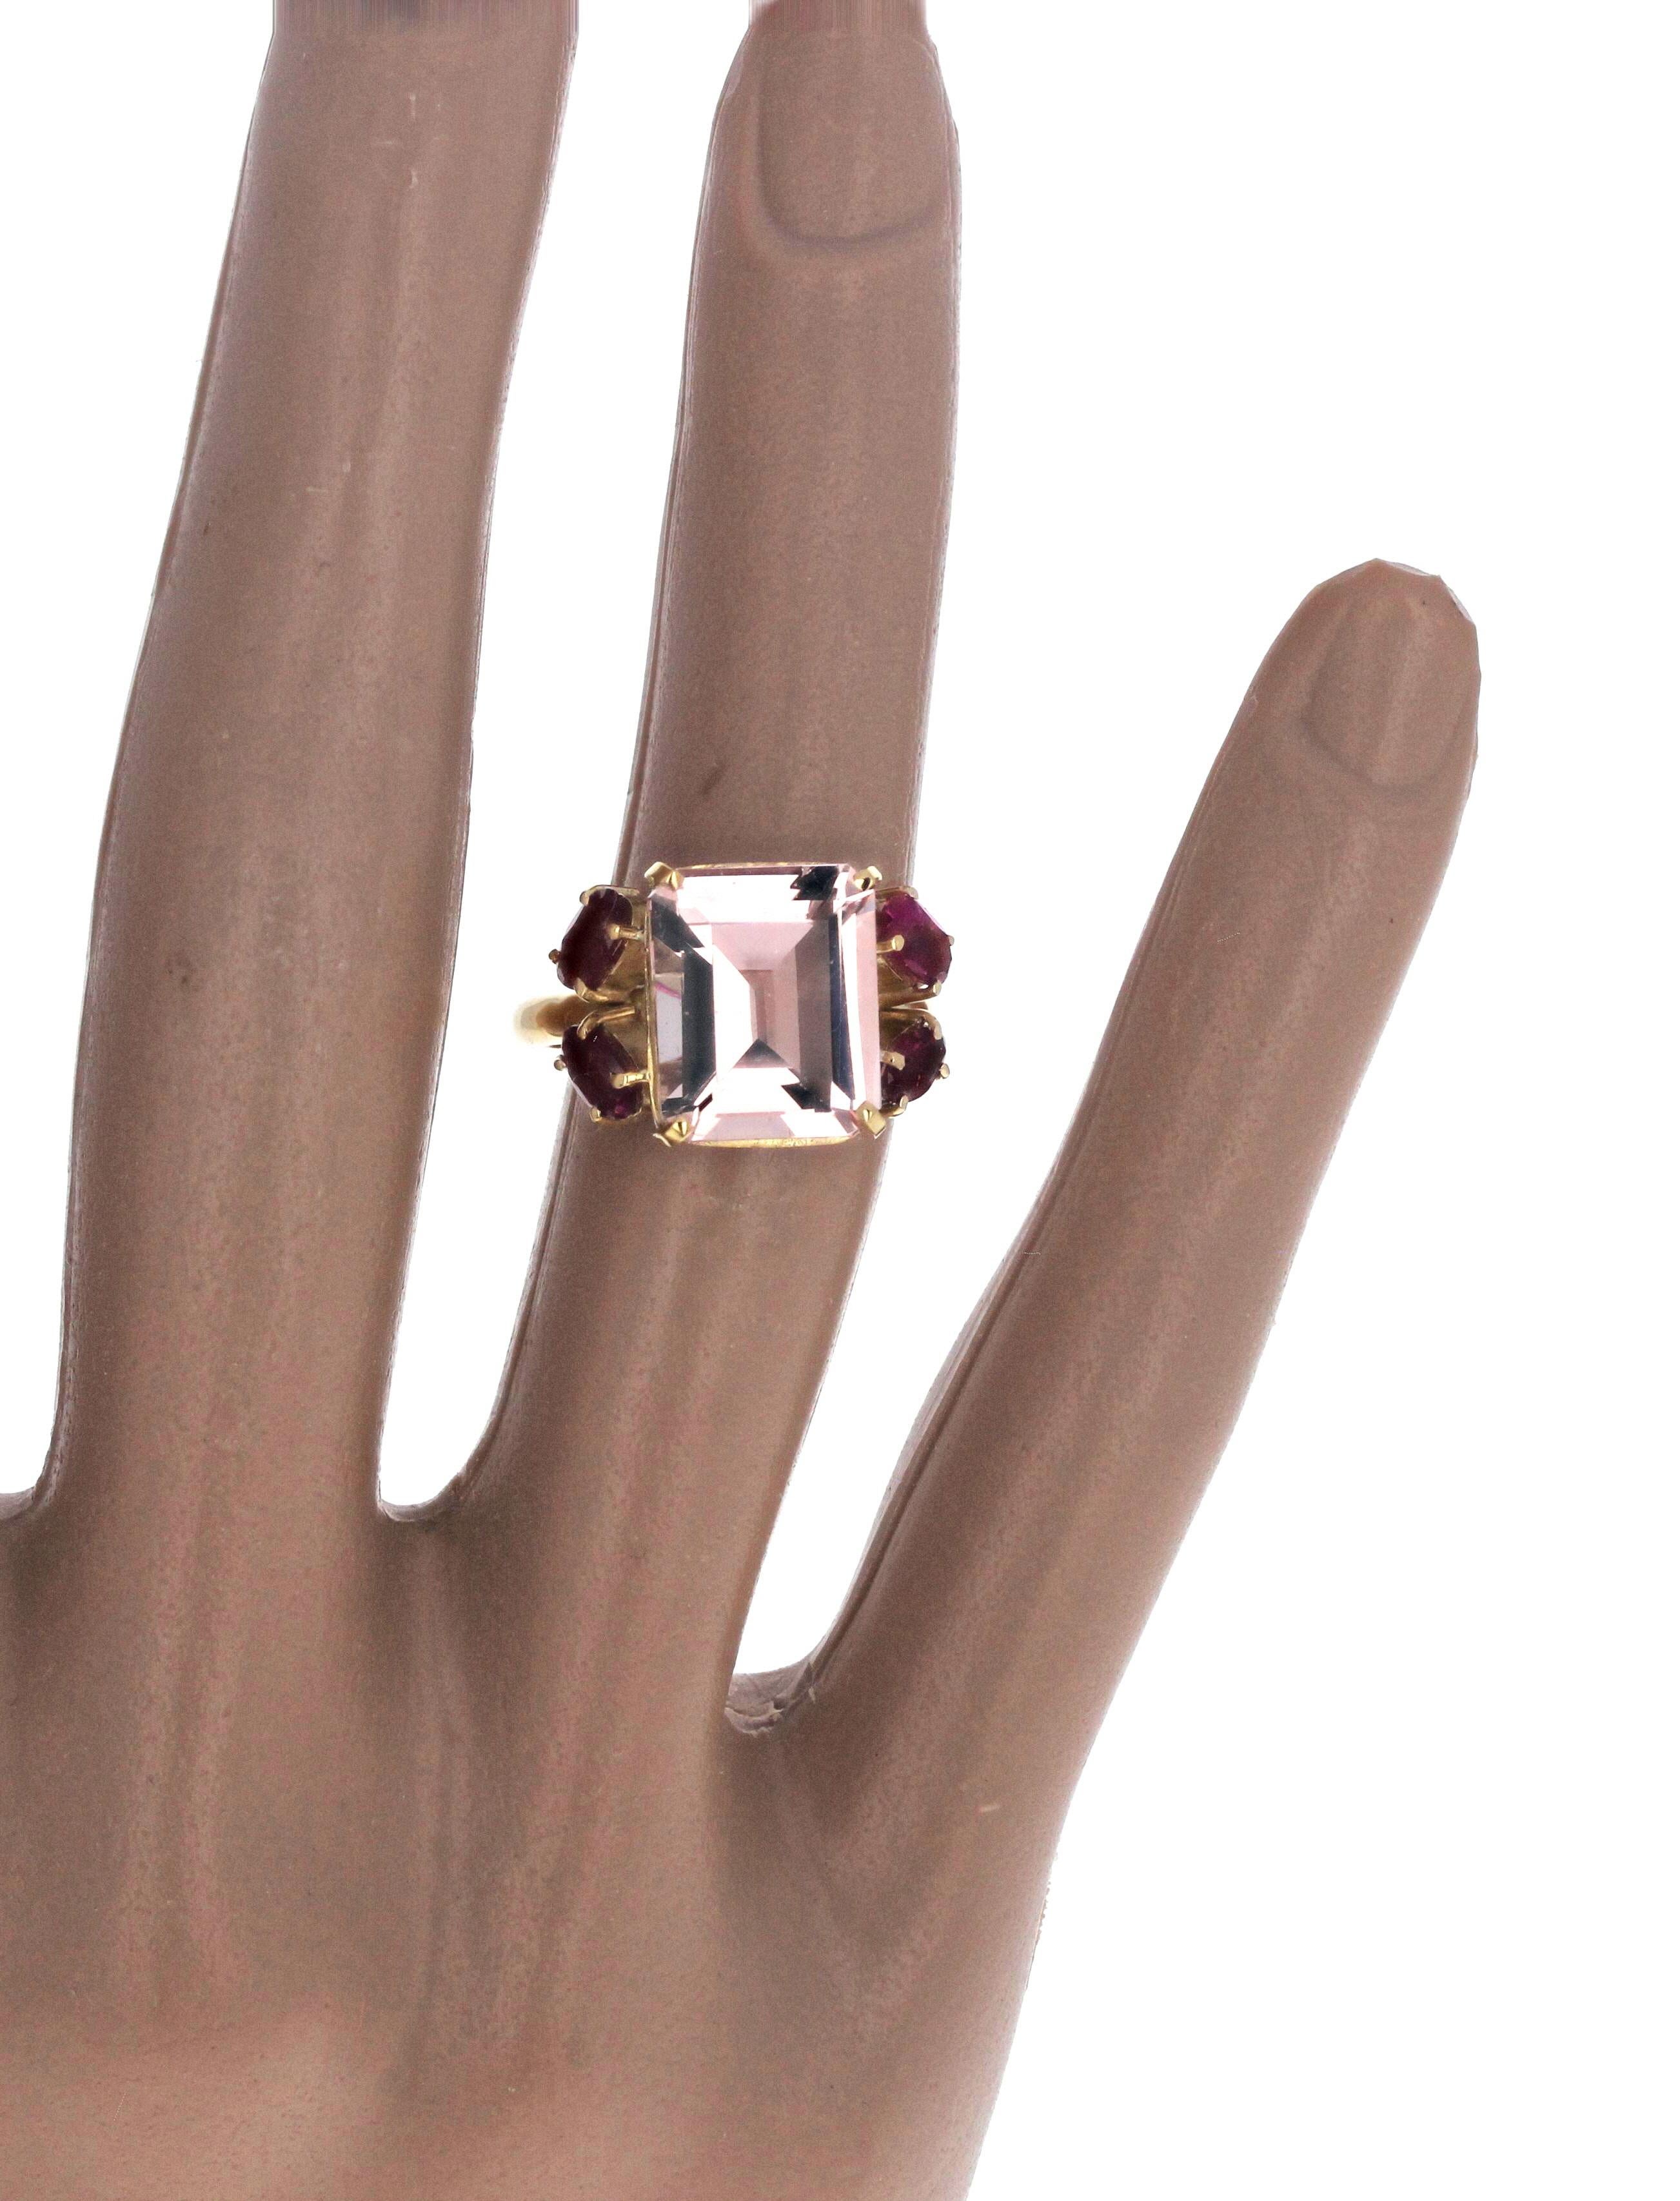 AJD GORGEOUS 4.5Ct Pink Morganite & Pink Tourmaline 18Kt Yellow Gold Ring For Sale 2